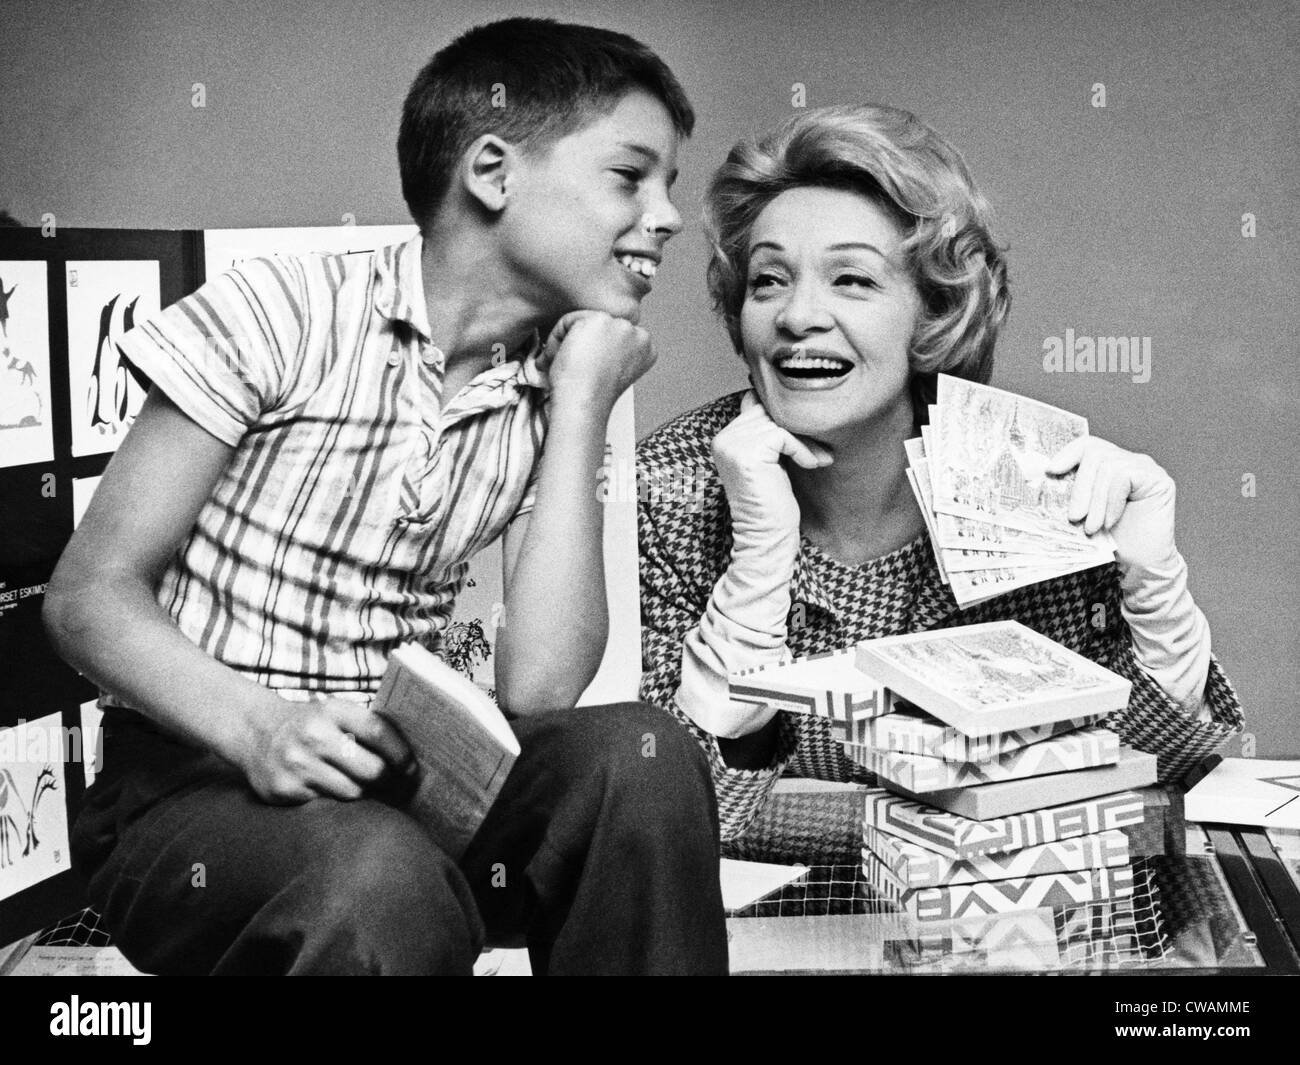 Marlene Dietrich sells a boy Christmas cards at a UNICEF fundraiser, 1961. Courtesy: CSU Archives/Everett Collection Stock Photo